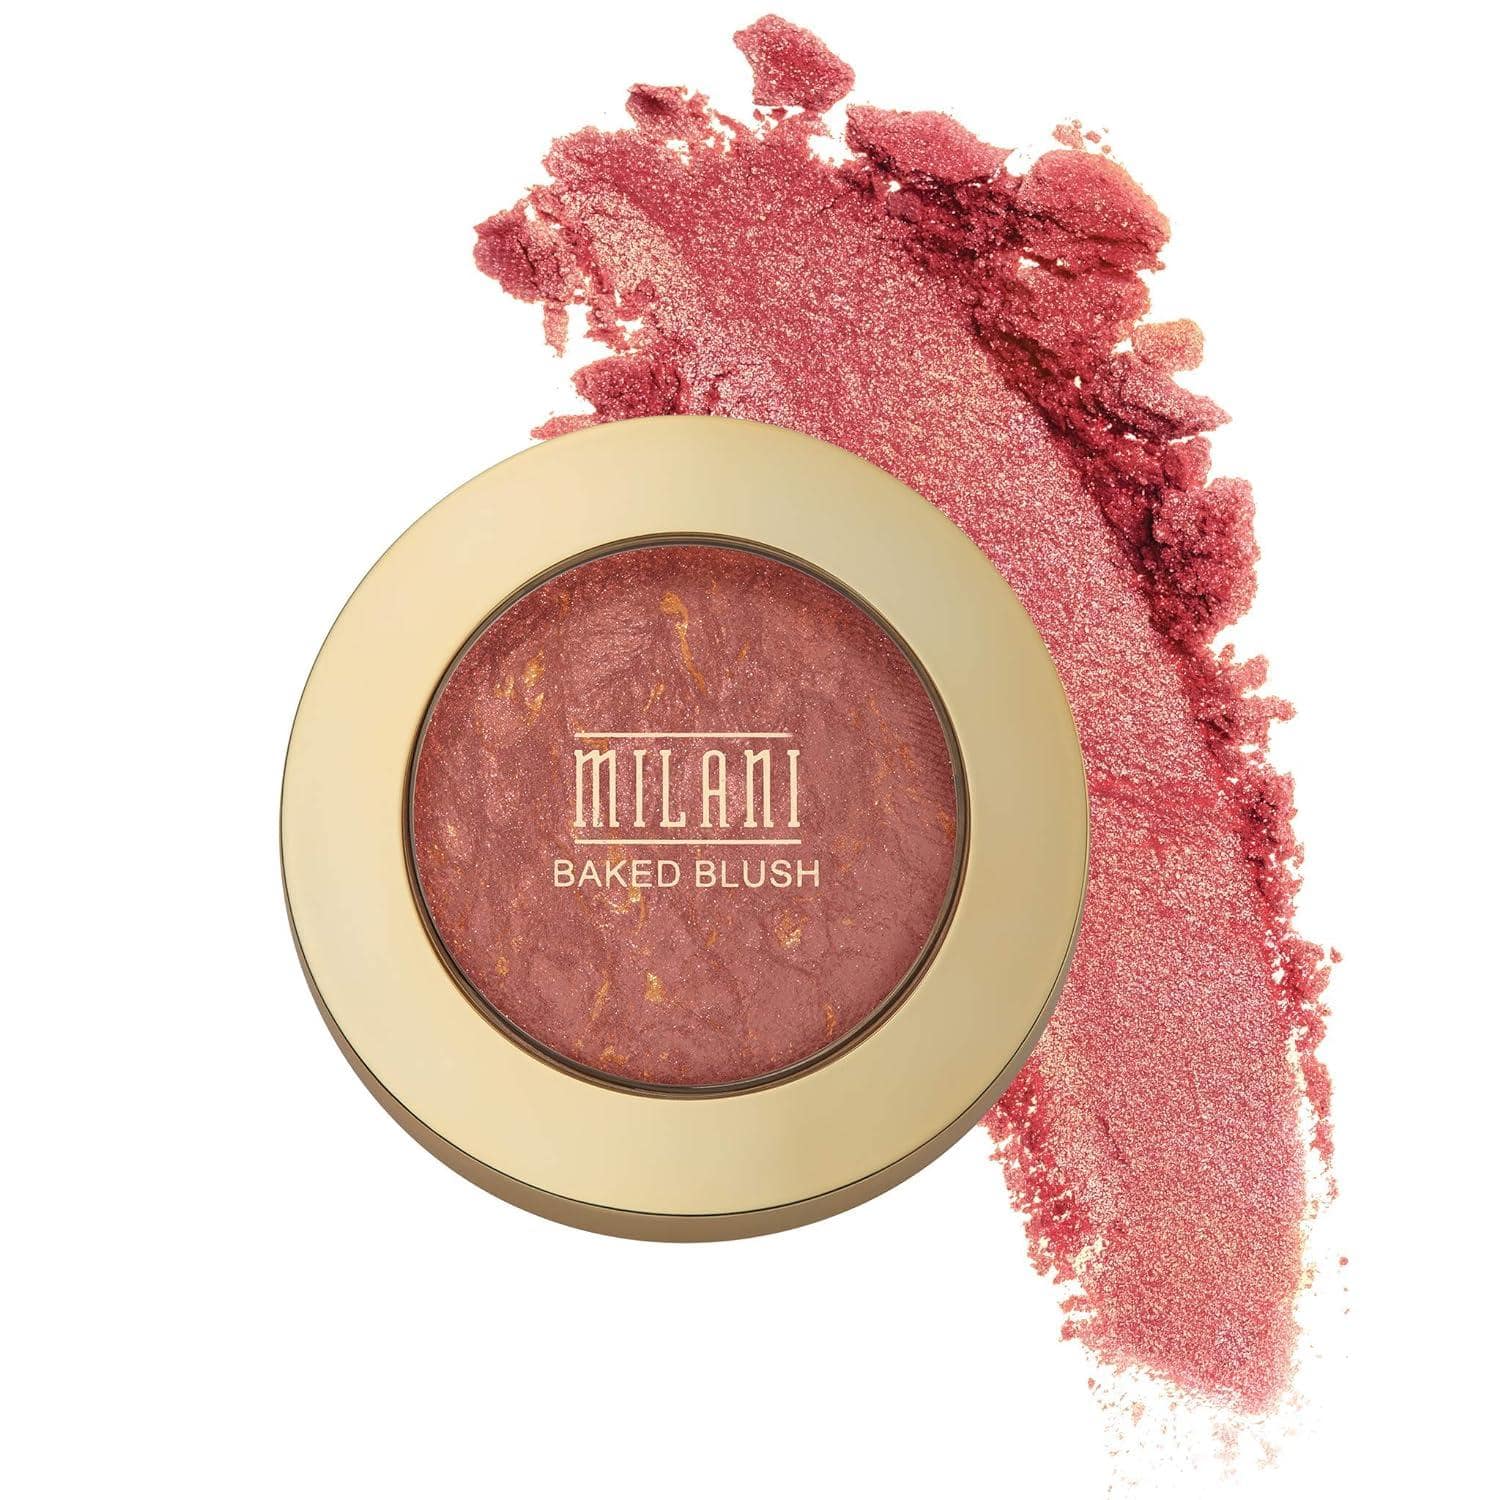 Blush Bliss Effortlessly blendable, luminous finish, highly pigmented, all at an accessible price point.